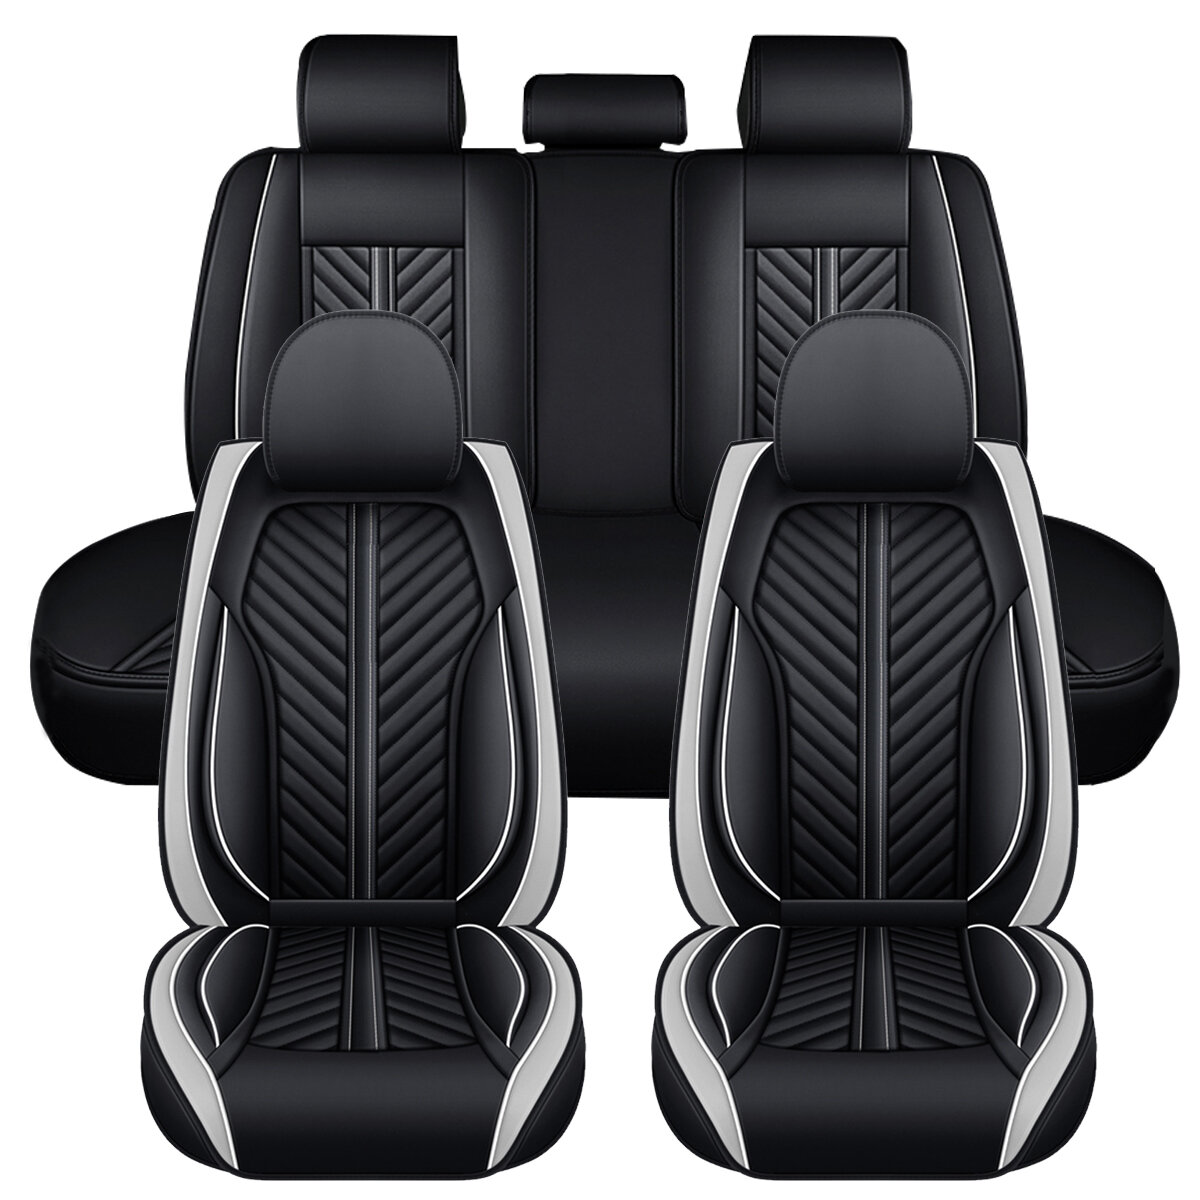 Image of ELUTO 5D 5 Seats PU Leather Full set Car Seat Covers Universal Seat Cushion Pad Mad protector